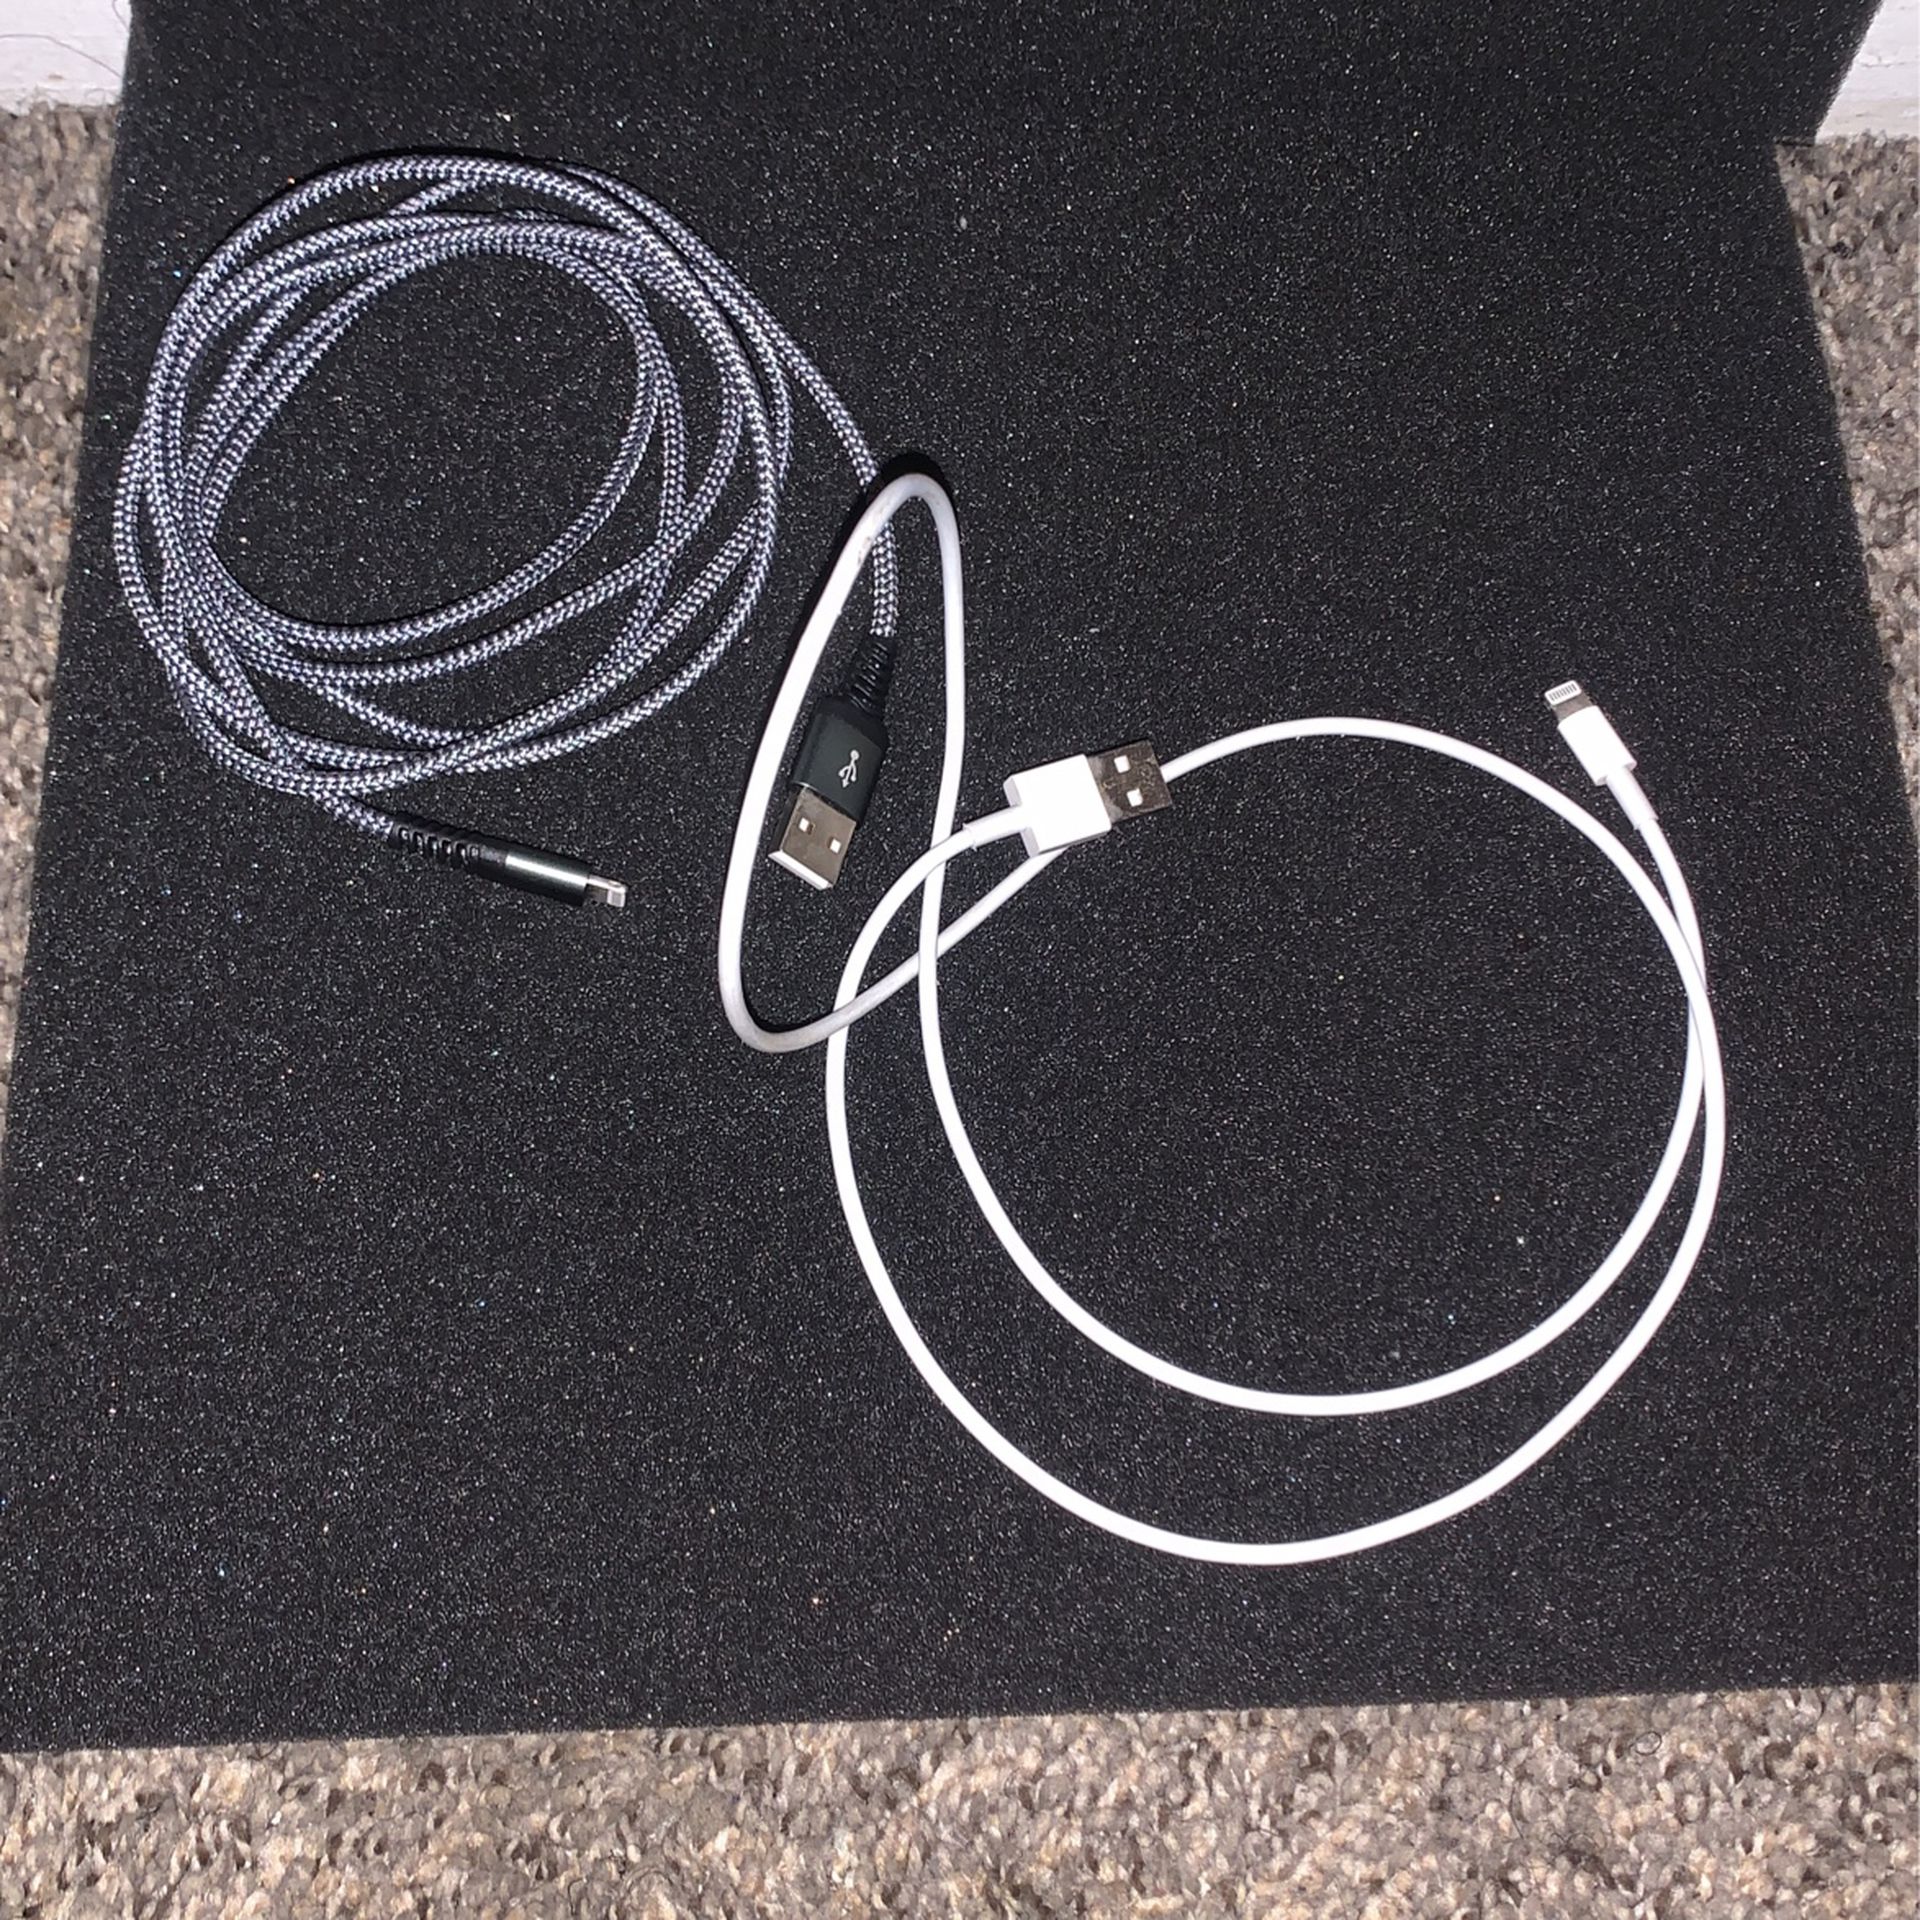 2 iPhone Charger Cords